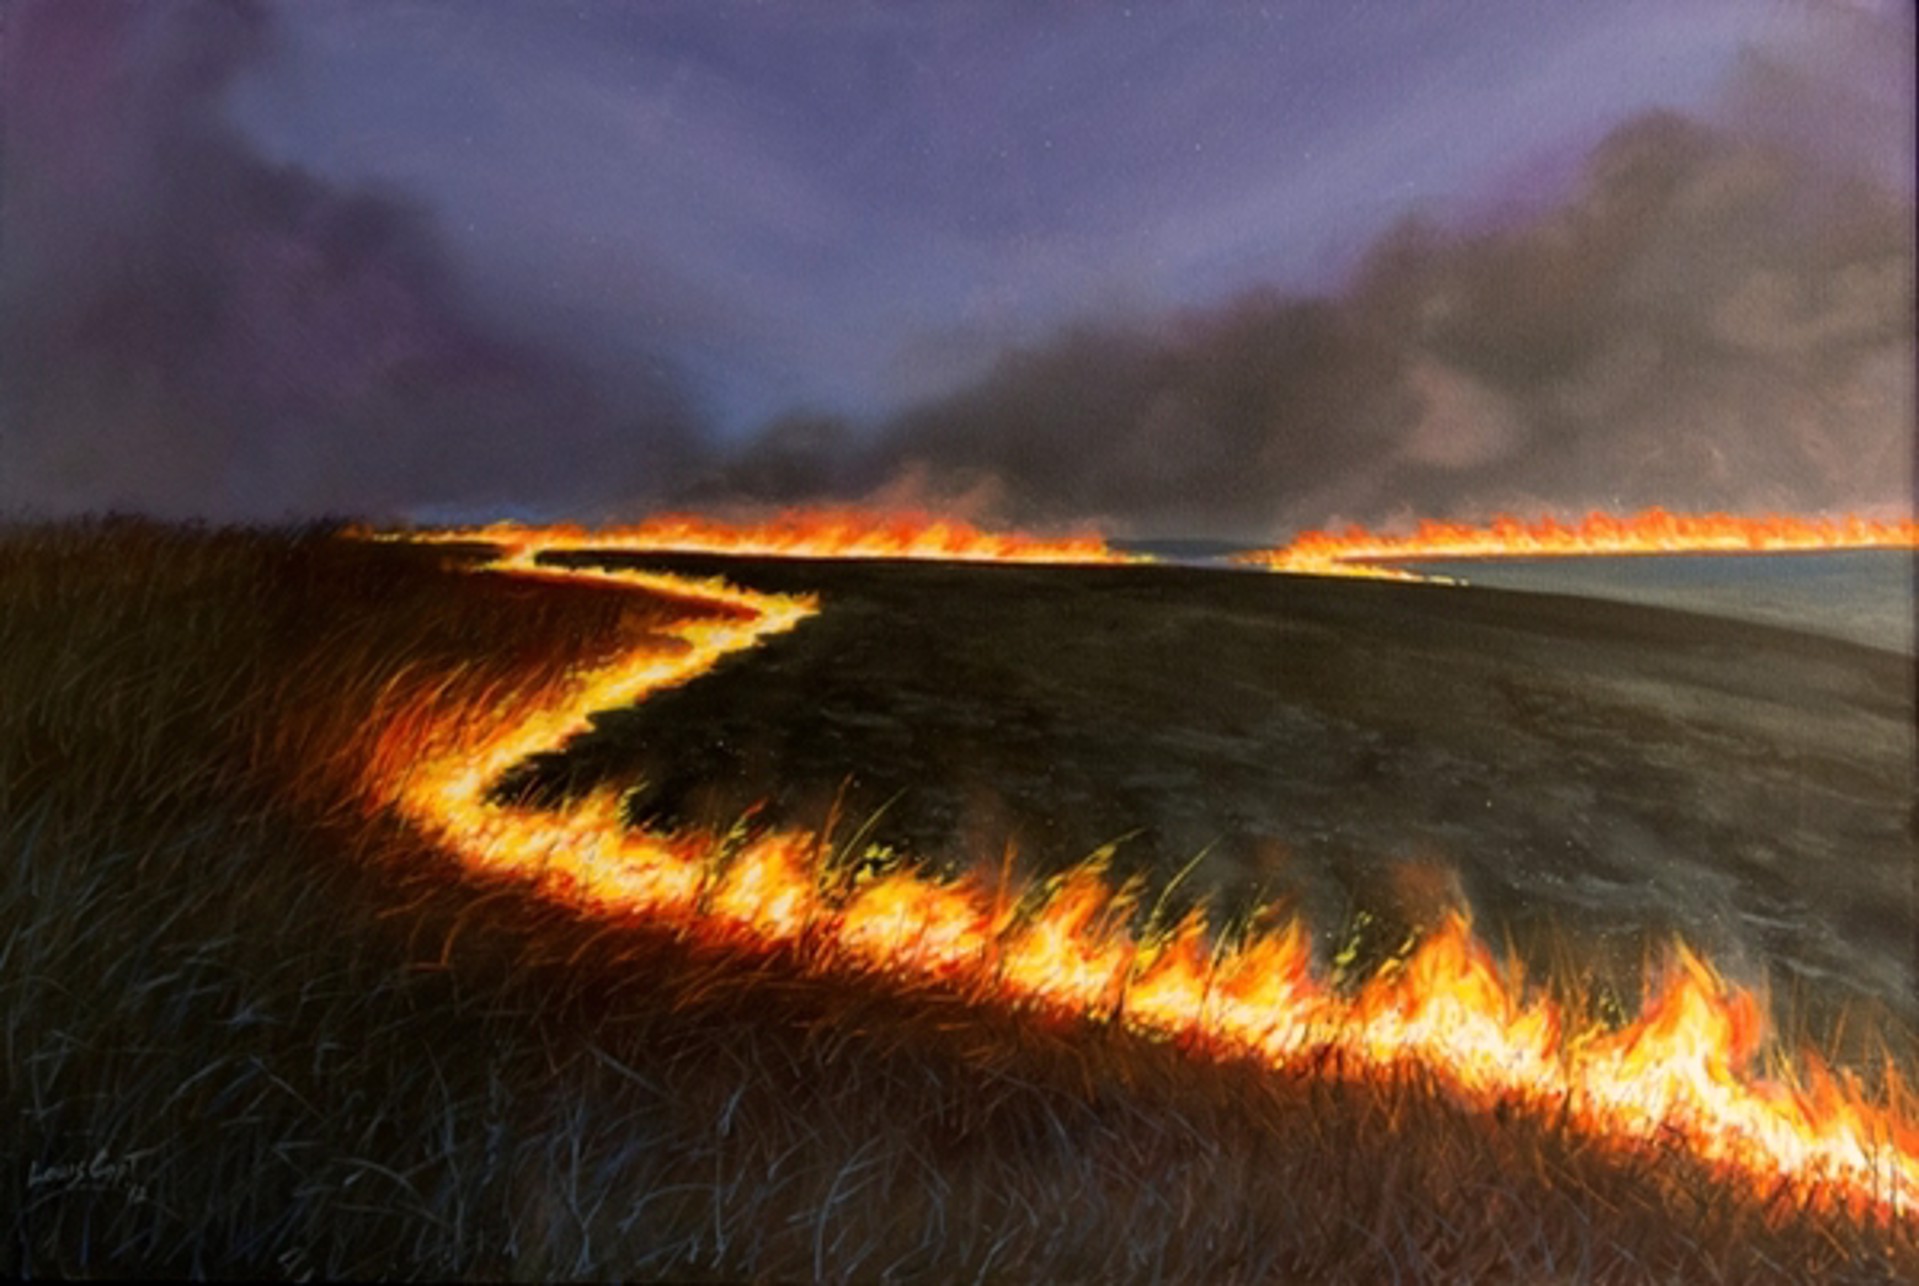 Field of Flames by Louis Copt